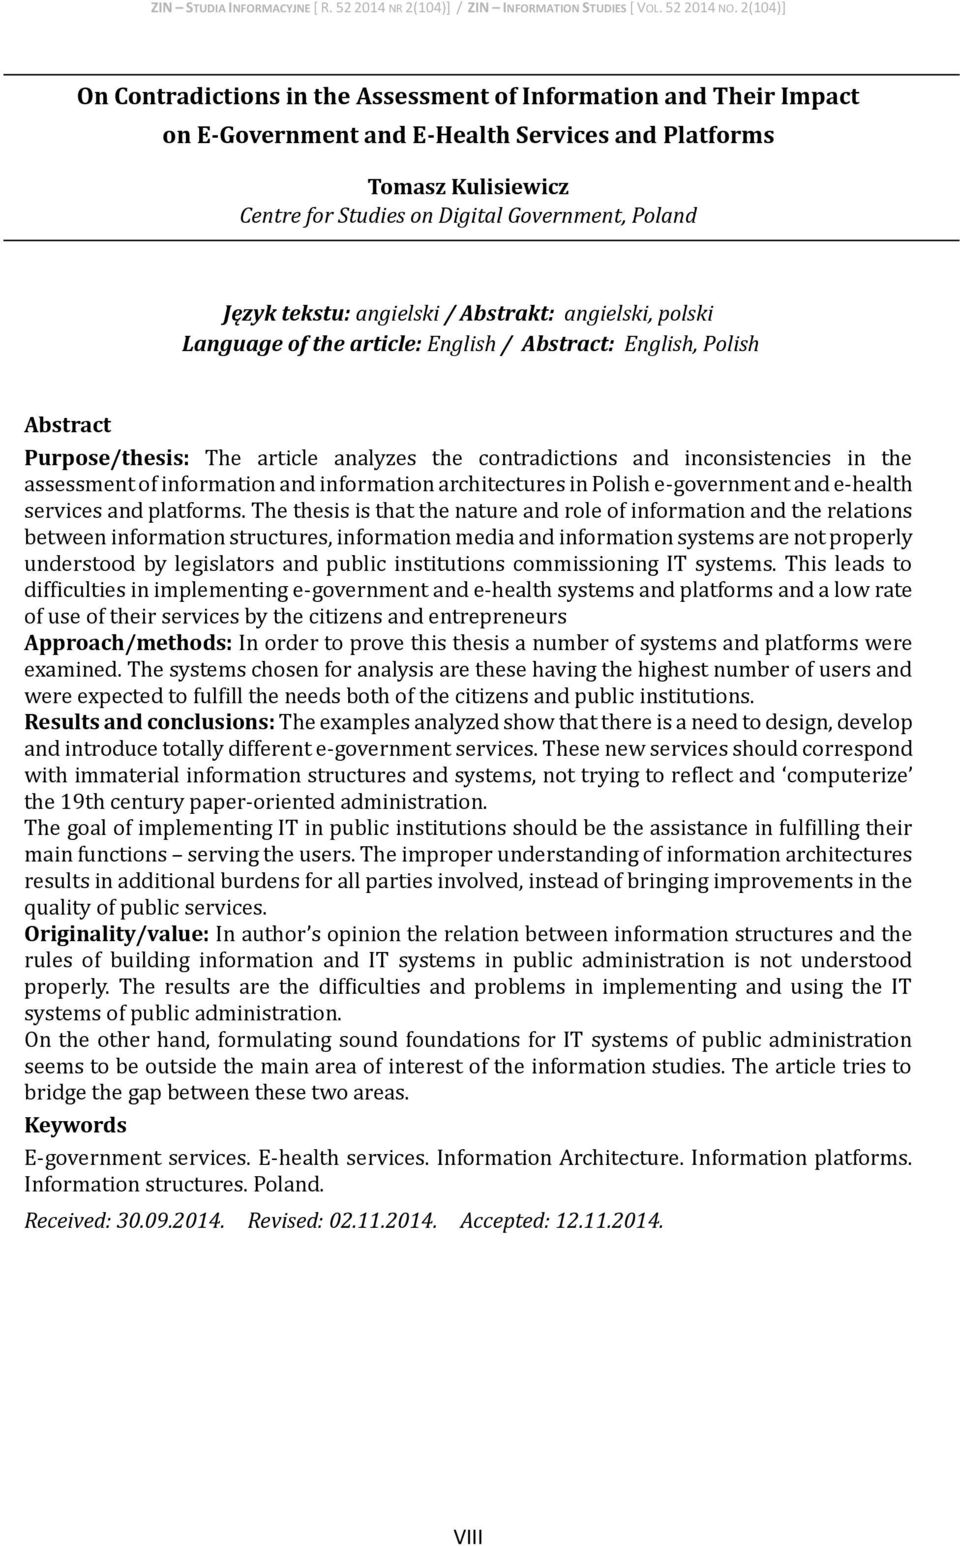 the assessment of information and information architectures in Polish e-government and e-health services and platforms.